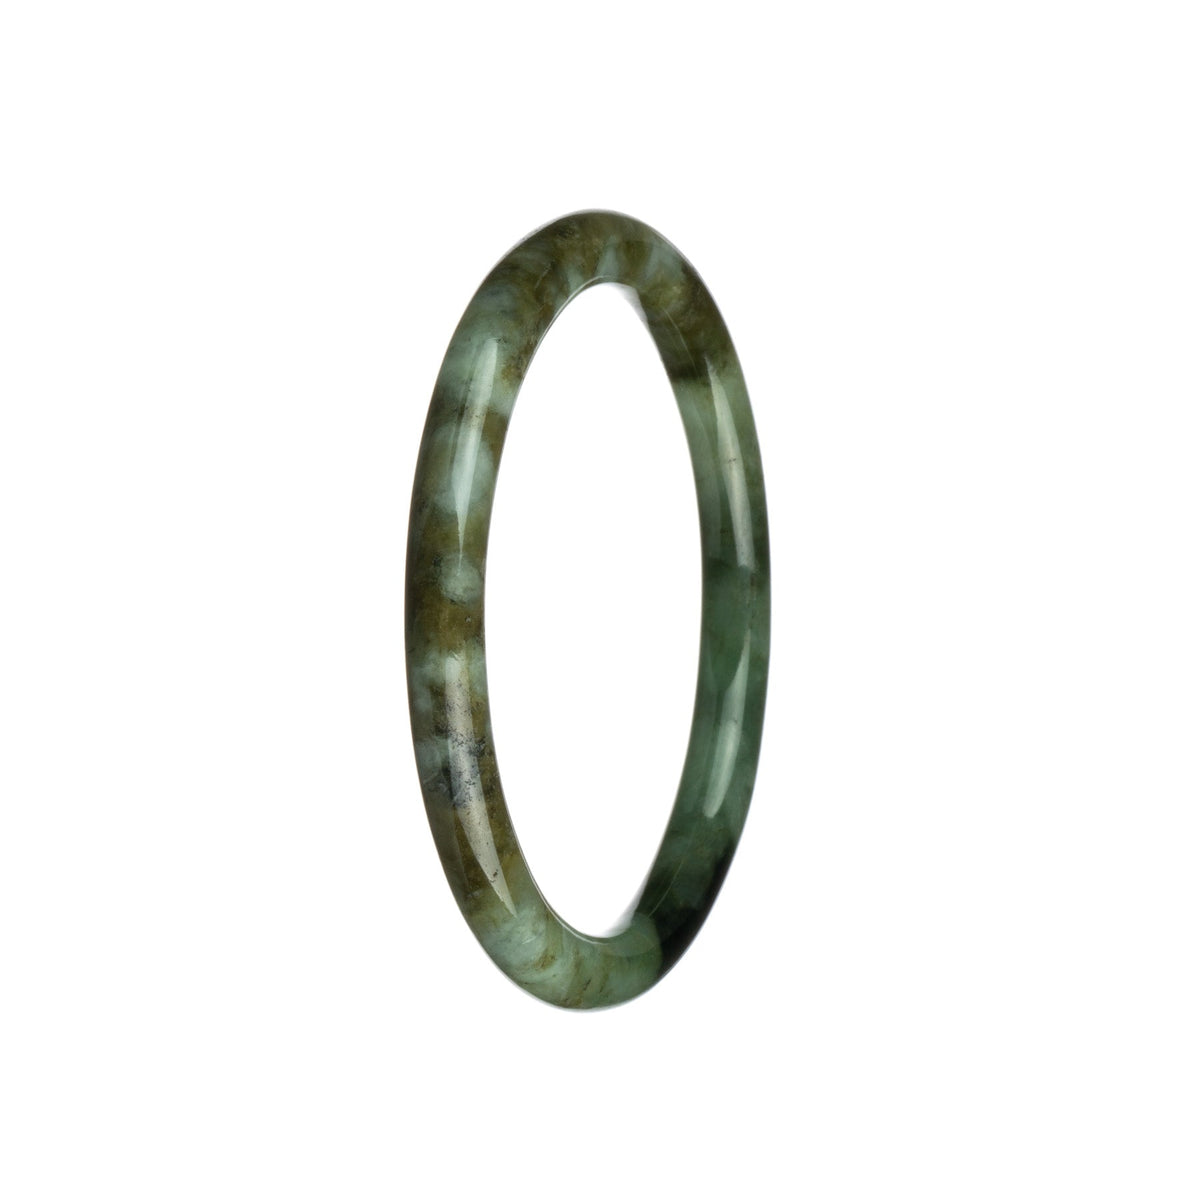 A close-up image of a petite round jadeite bangle featuring a genuine Type A green, brown, and white pattern. The bangle measures 61mm in size and is made by MAYS™.